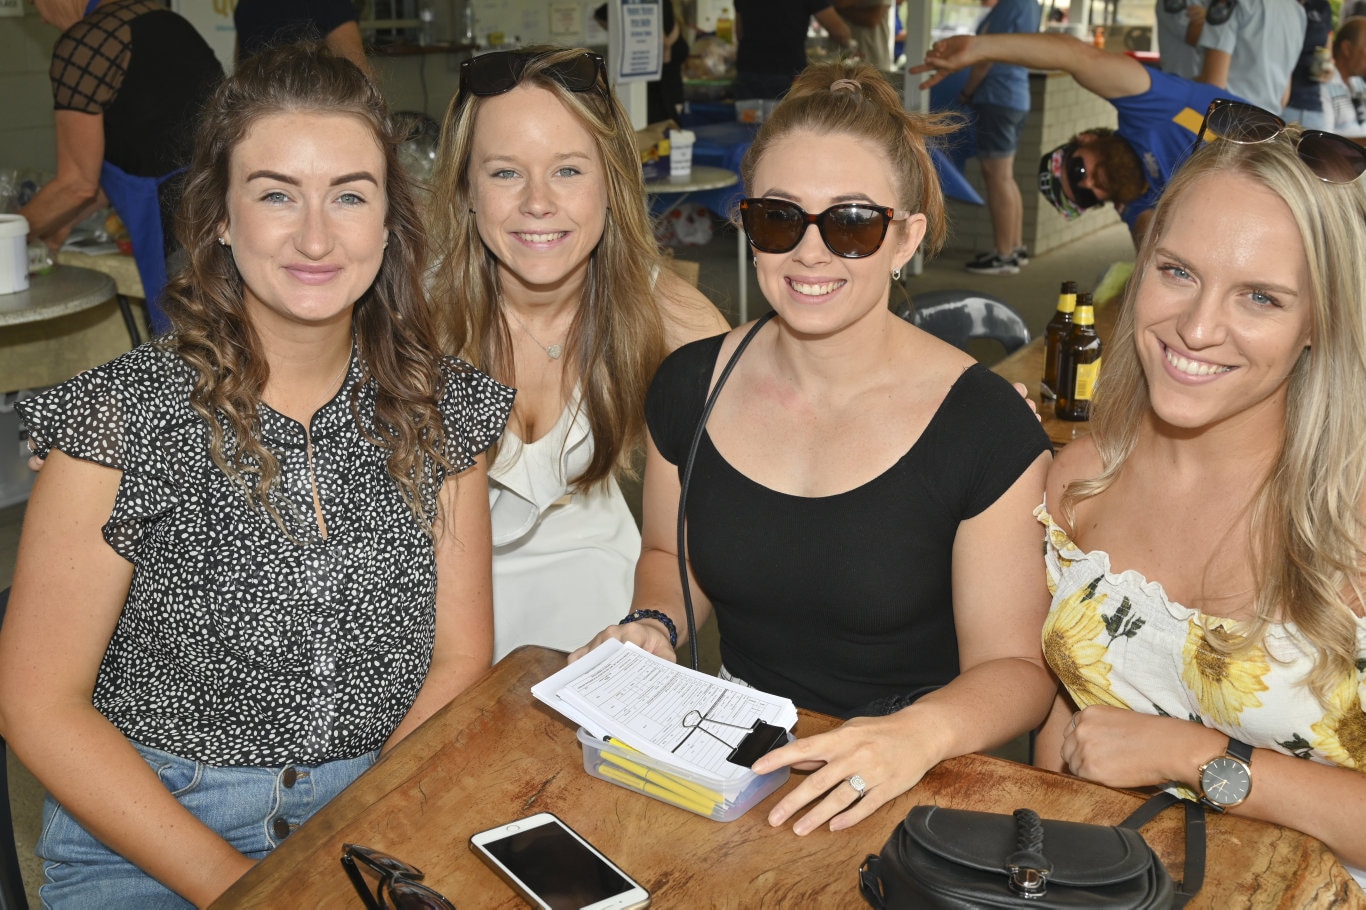 Peter McAulay Charity Golf Day. Victoria Holt, Sarah Kane, Jess Woodford and Erin Fordyce.